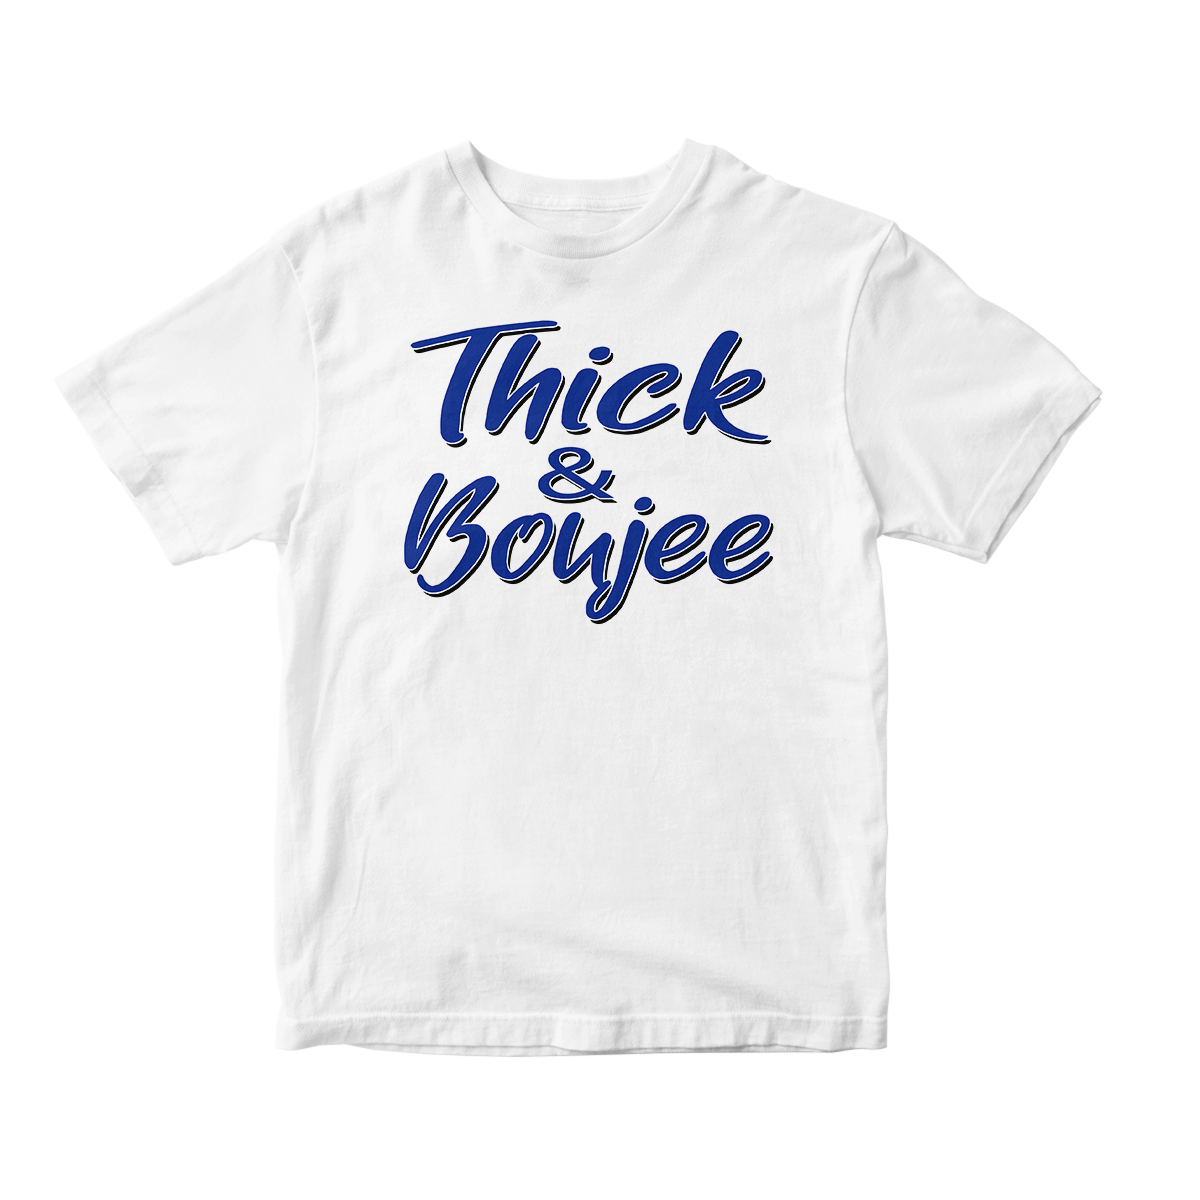 Thick & Boujee in Royal Blue Short Sleeve Tee